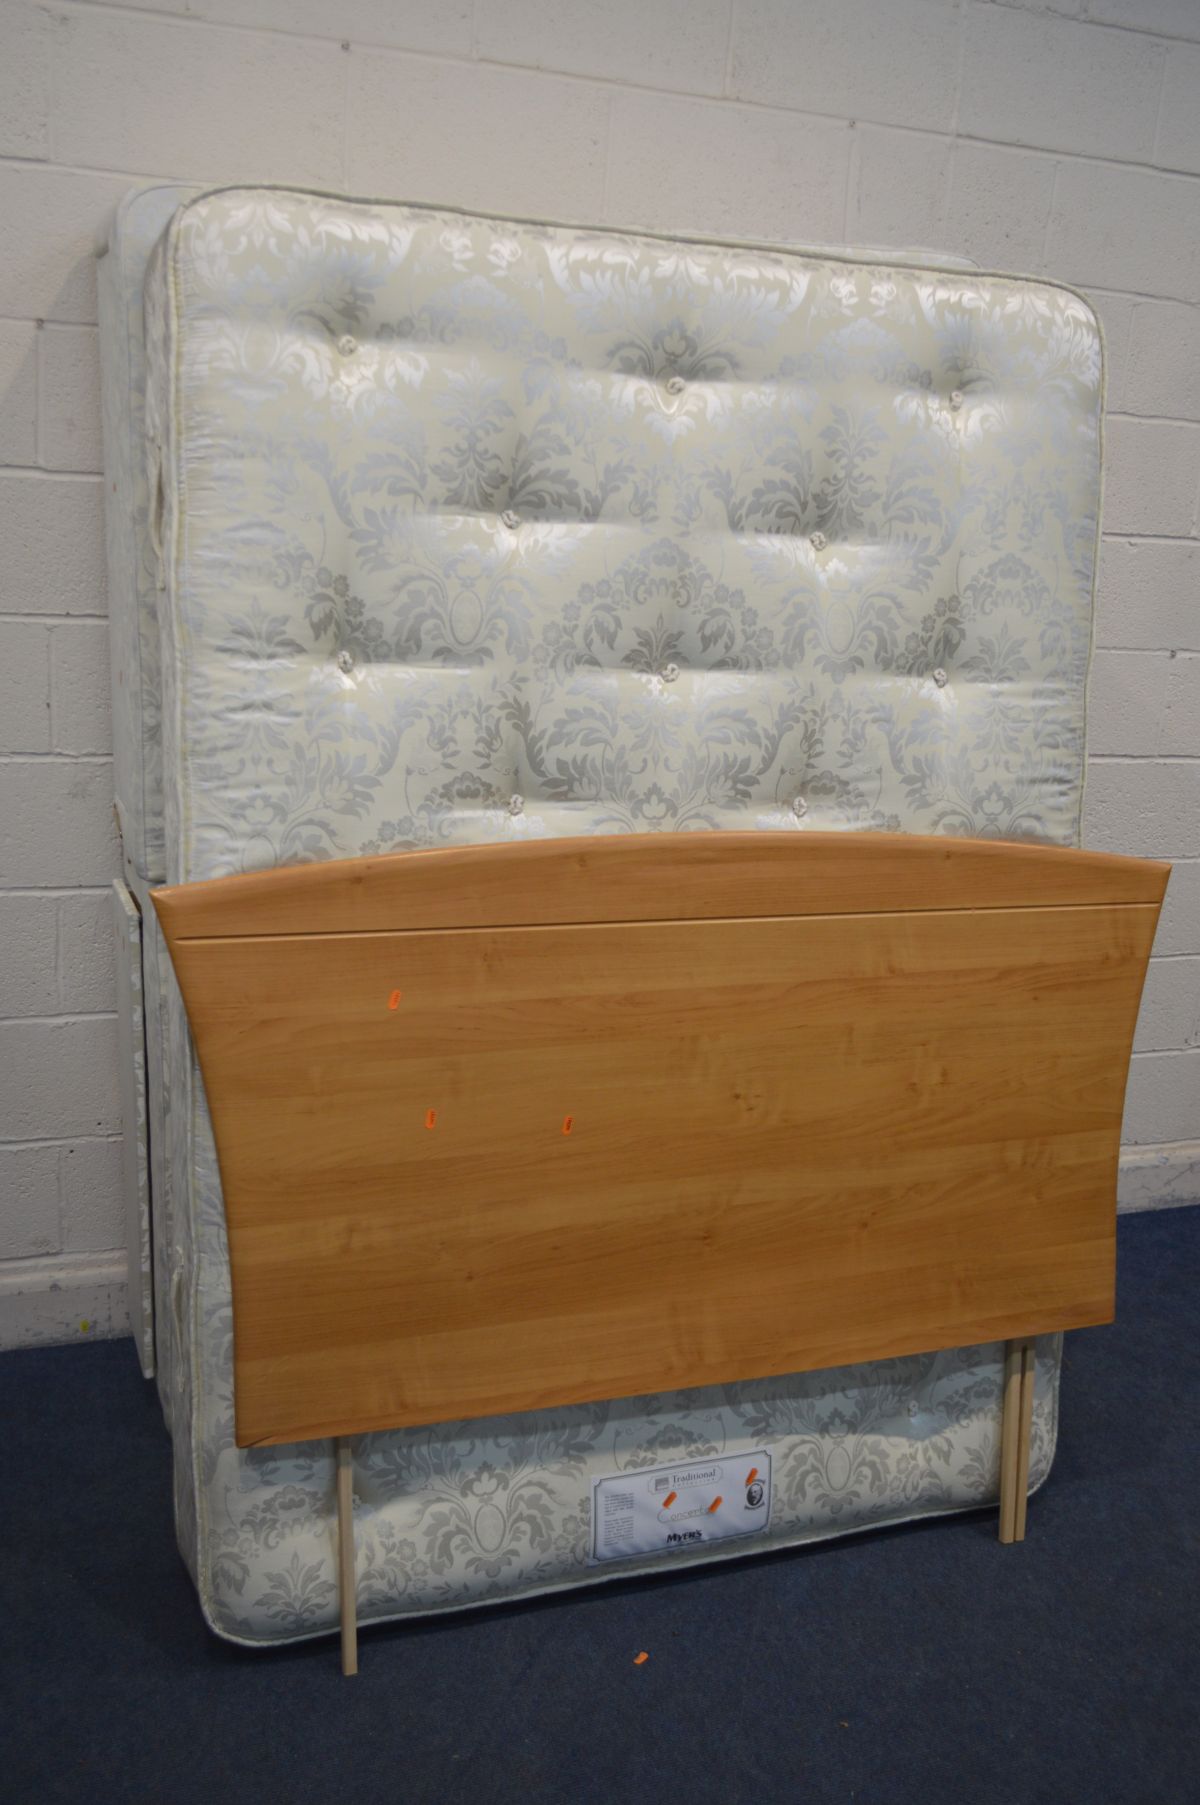 A MYERS 4FT6 DIVAN BED, with four drawers, mattress, and a beech finish headboard (Sd to headboard)